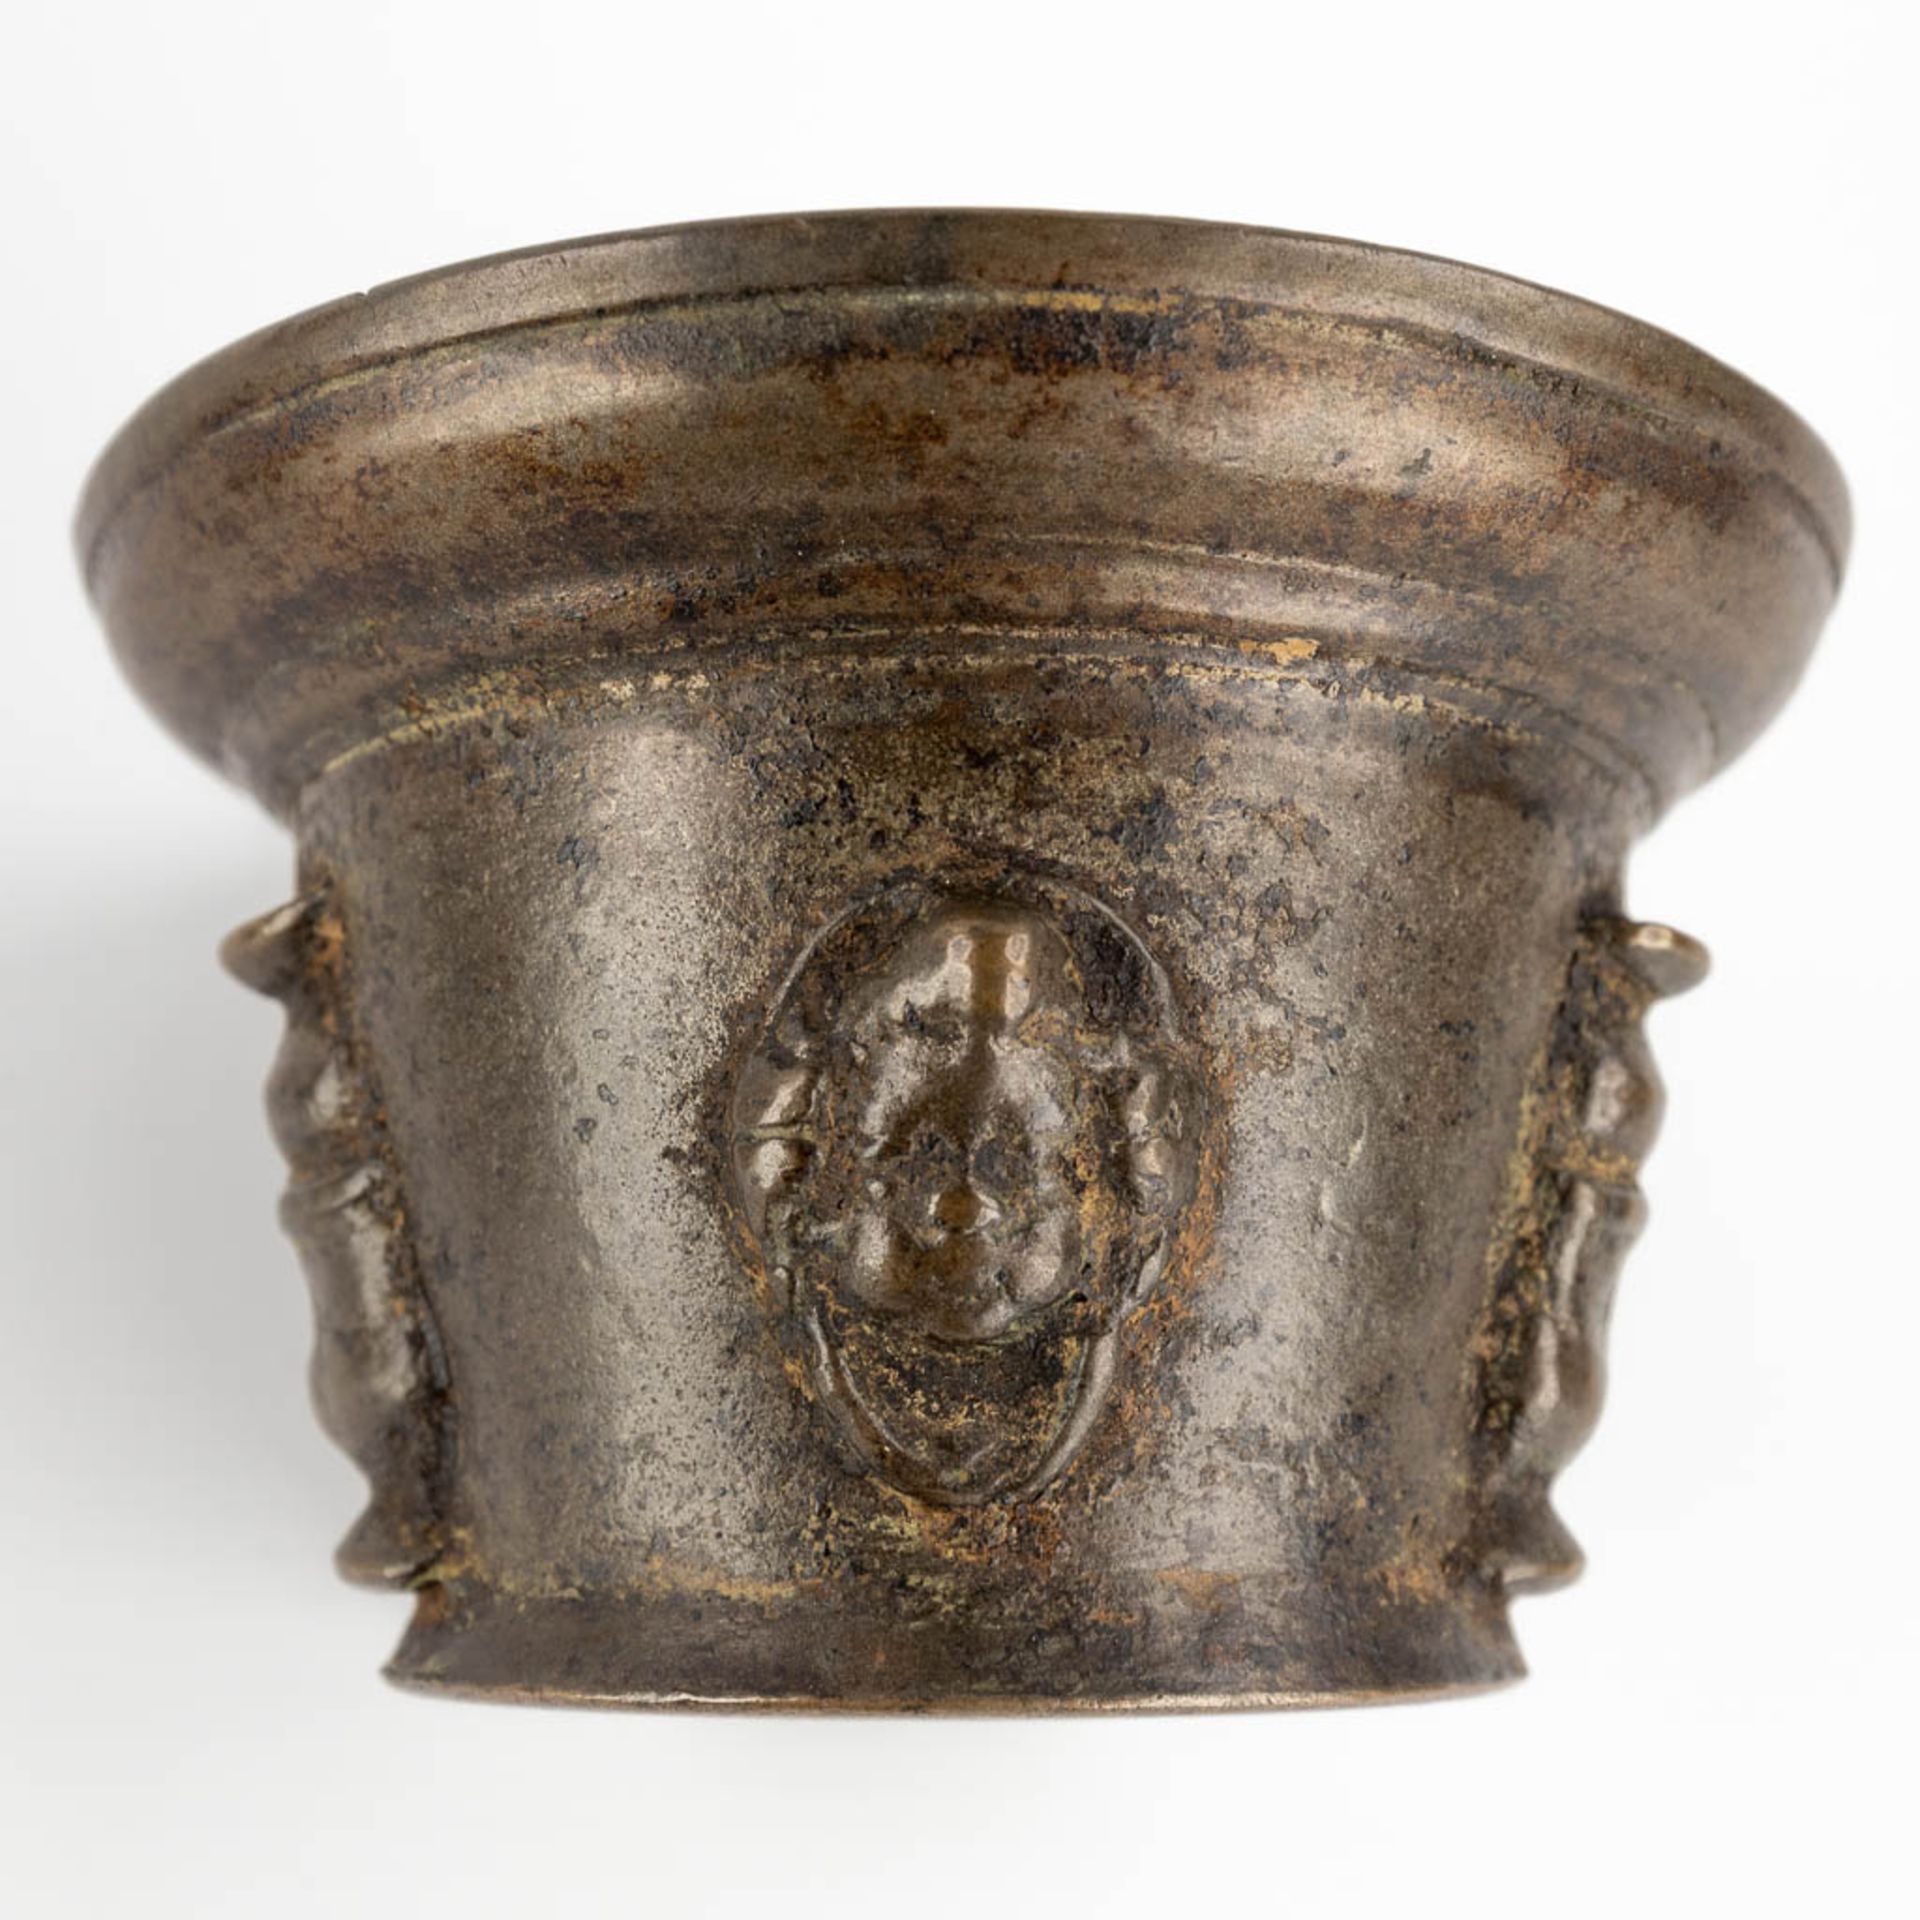 Three antique mortars with two pestles, bronze. Probably Spain, 17th/18th C. (H:9 x D:13 cm) - Image 9 of 12